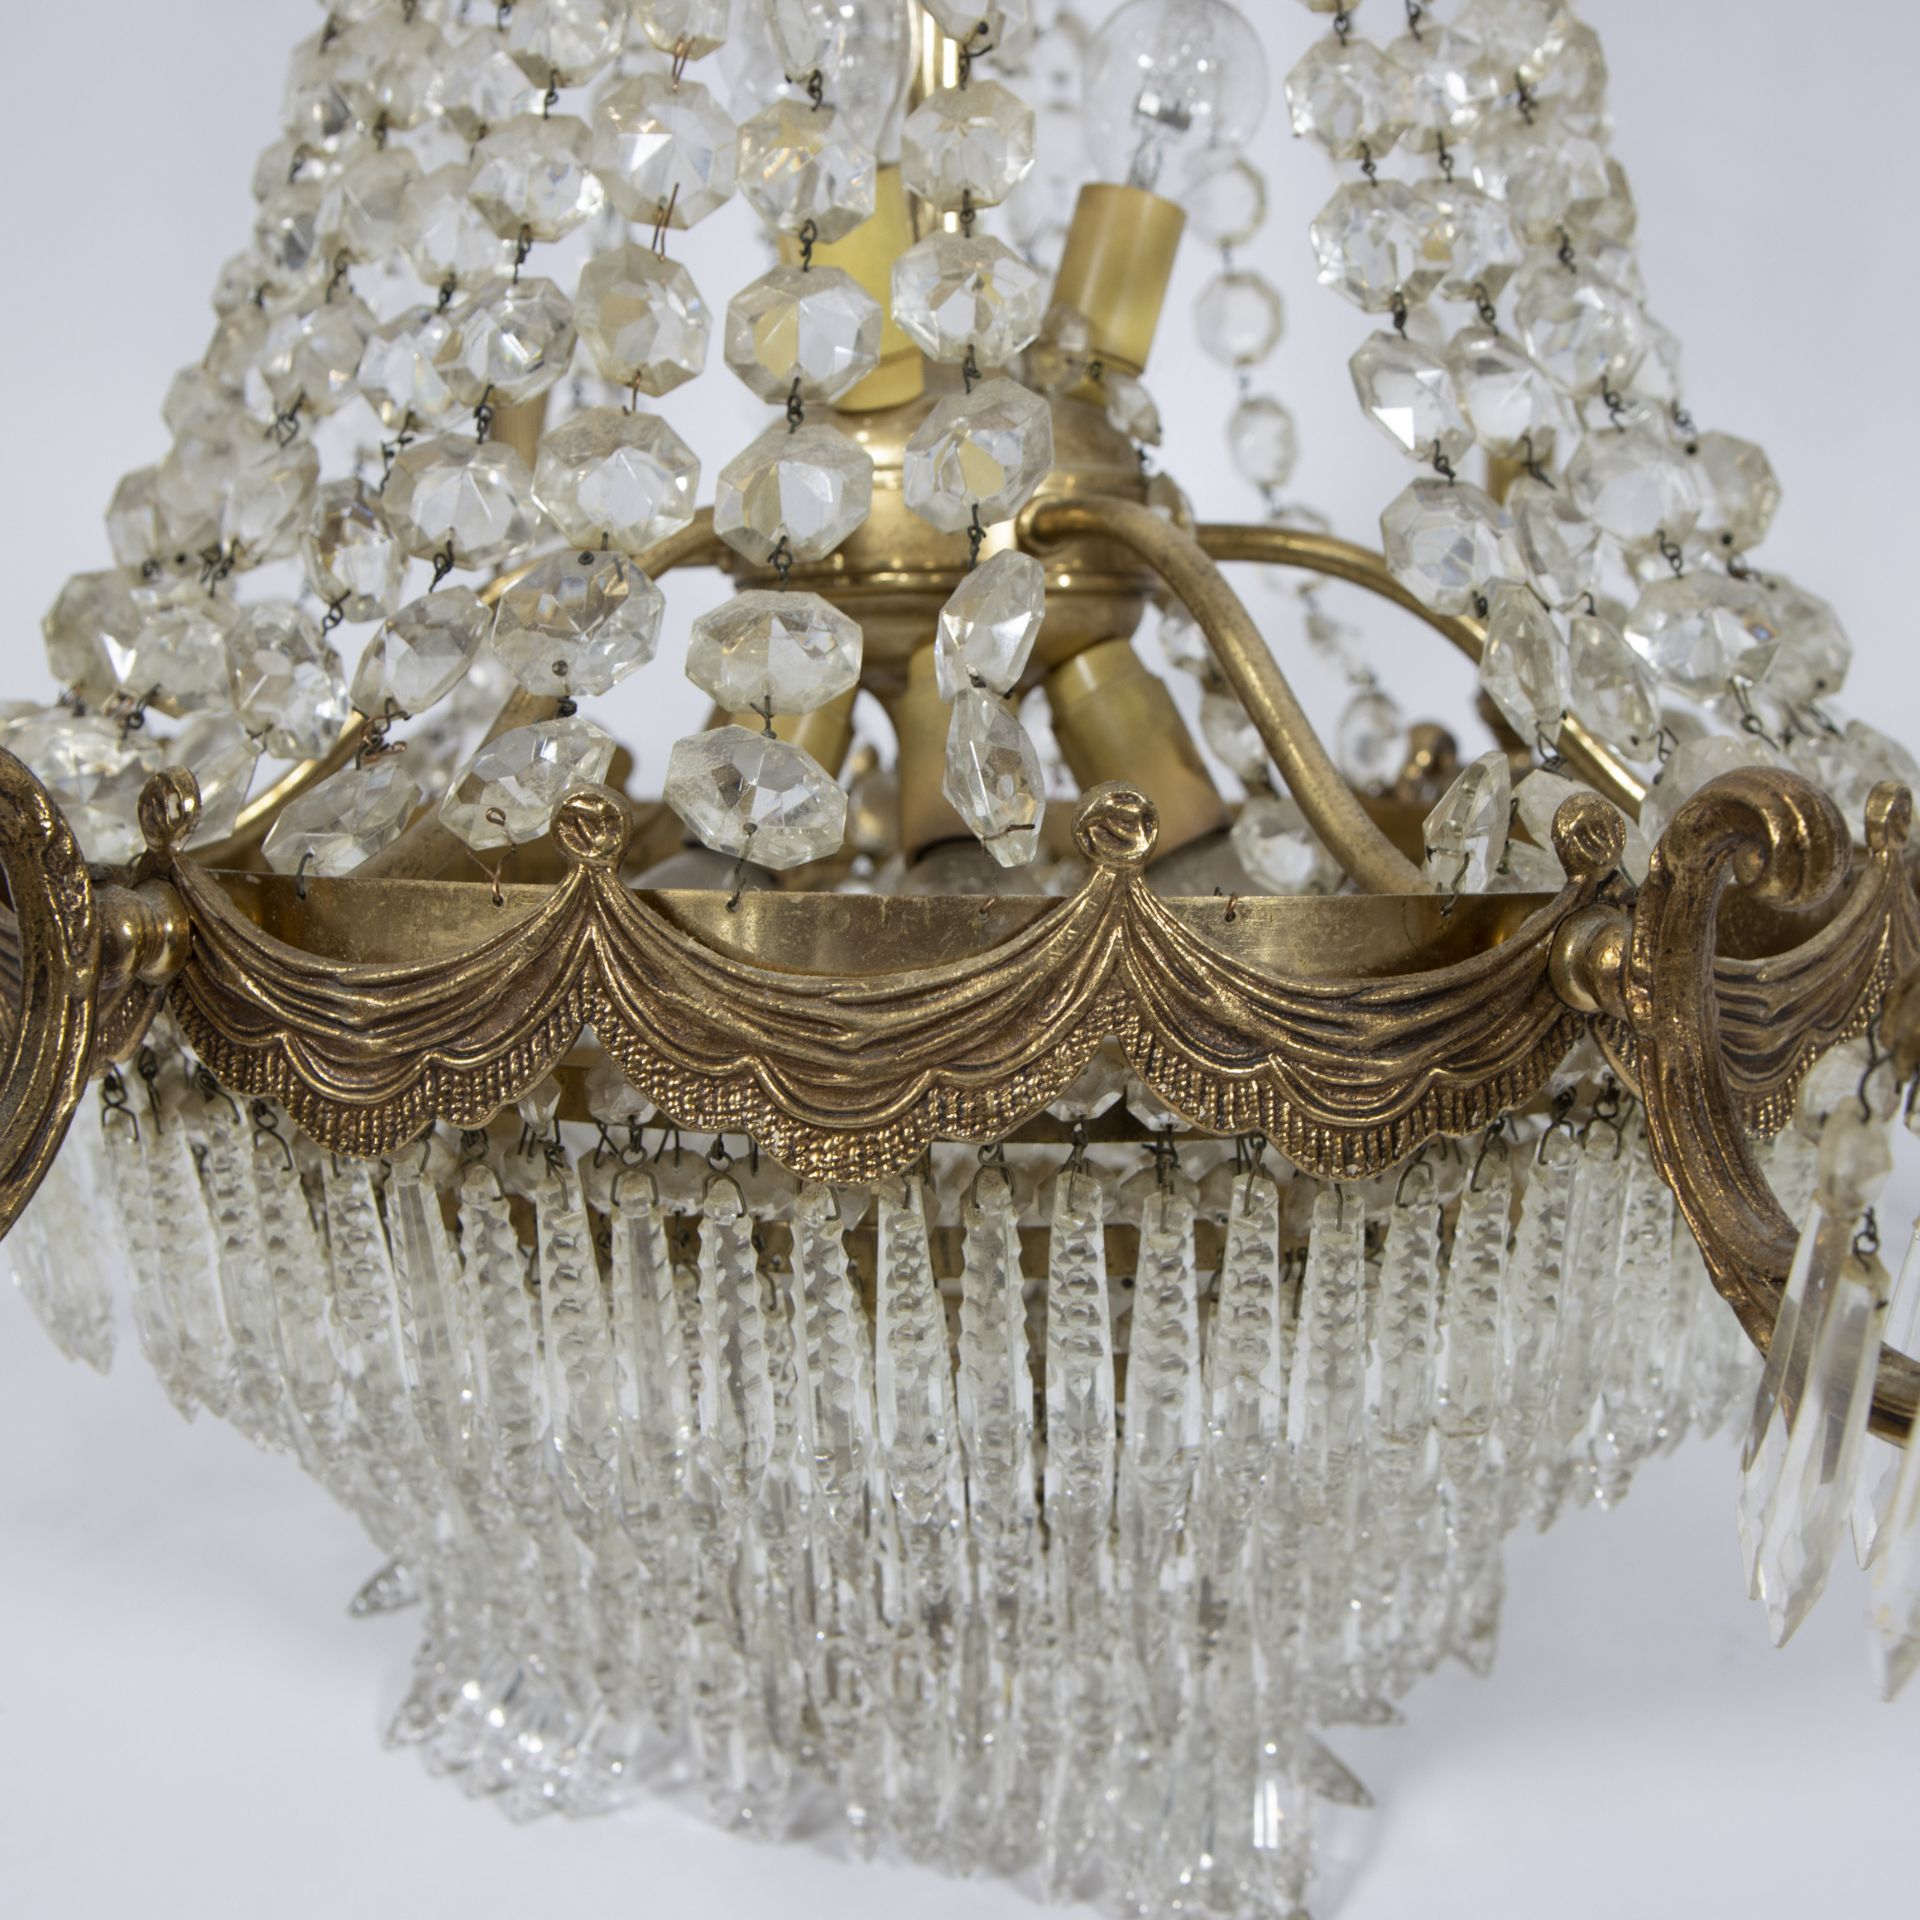 Pocket chandelier or sac à perle, from the top of the lamp, the crown, strings of beads run to the r - Image 2 of 2